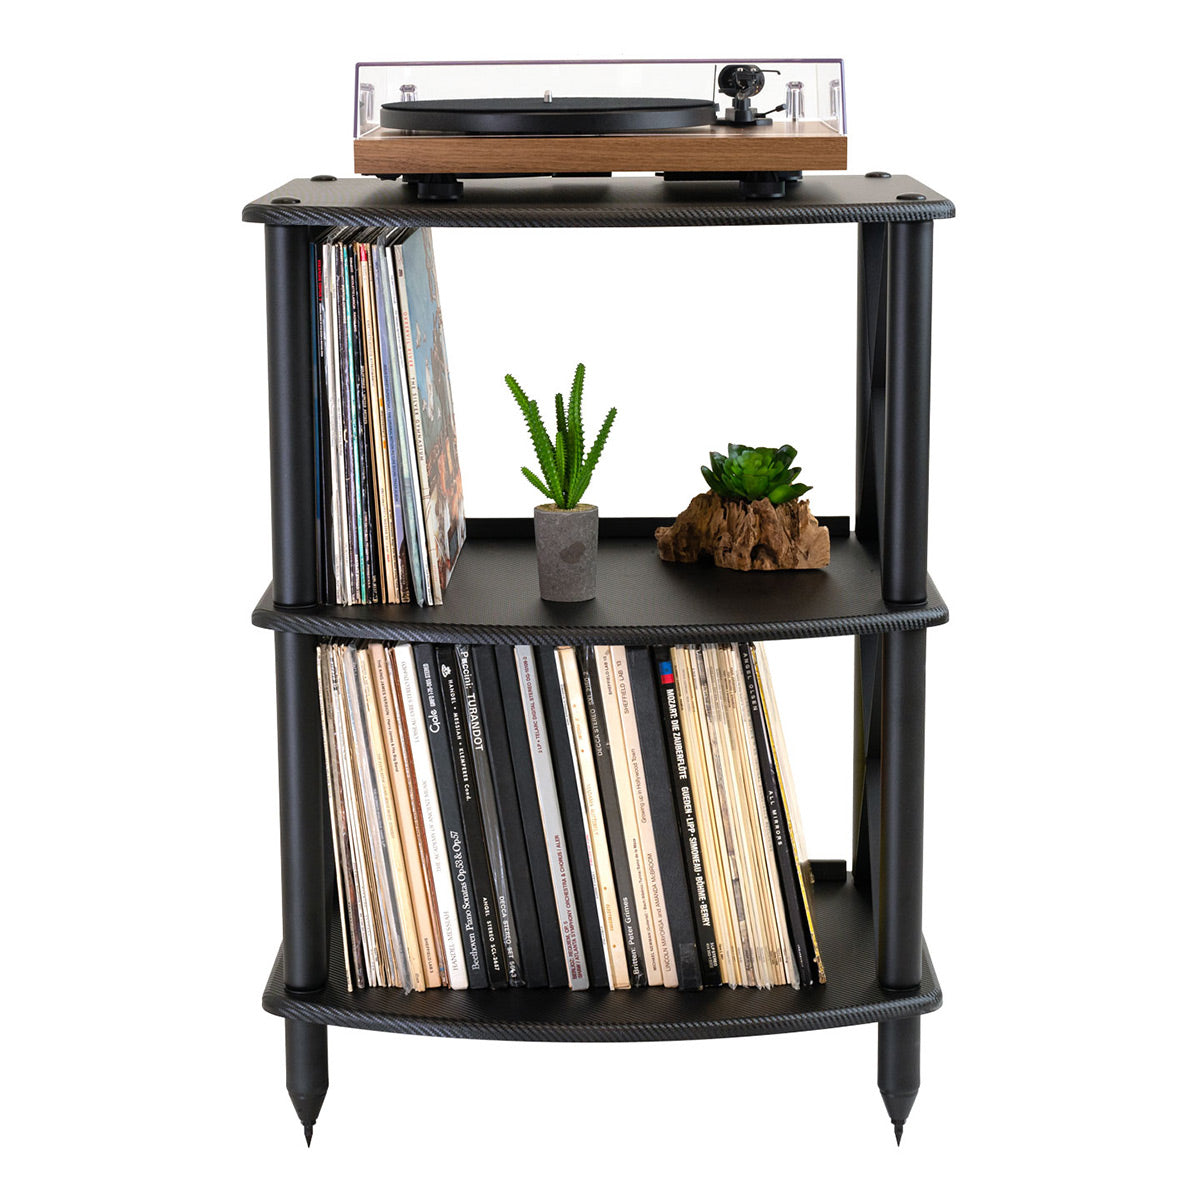 Pangea Audio Vulcan Turntable Stand and Record Storage Rack for LPs (Carbon)